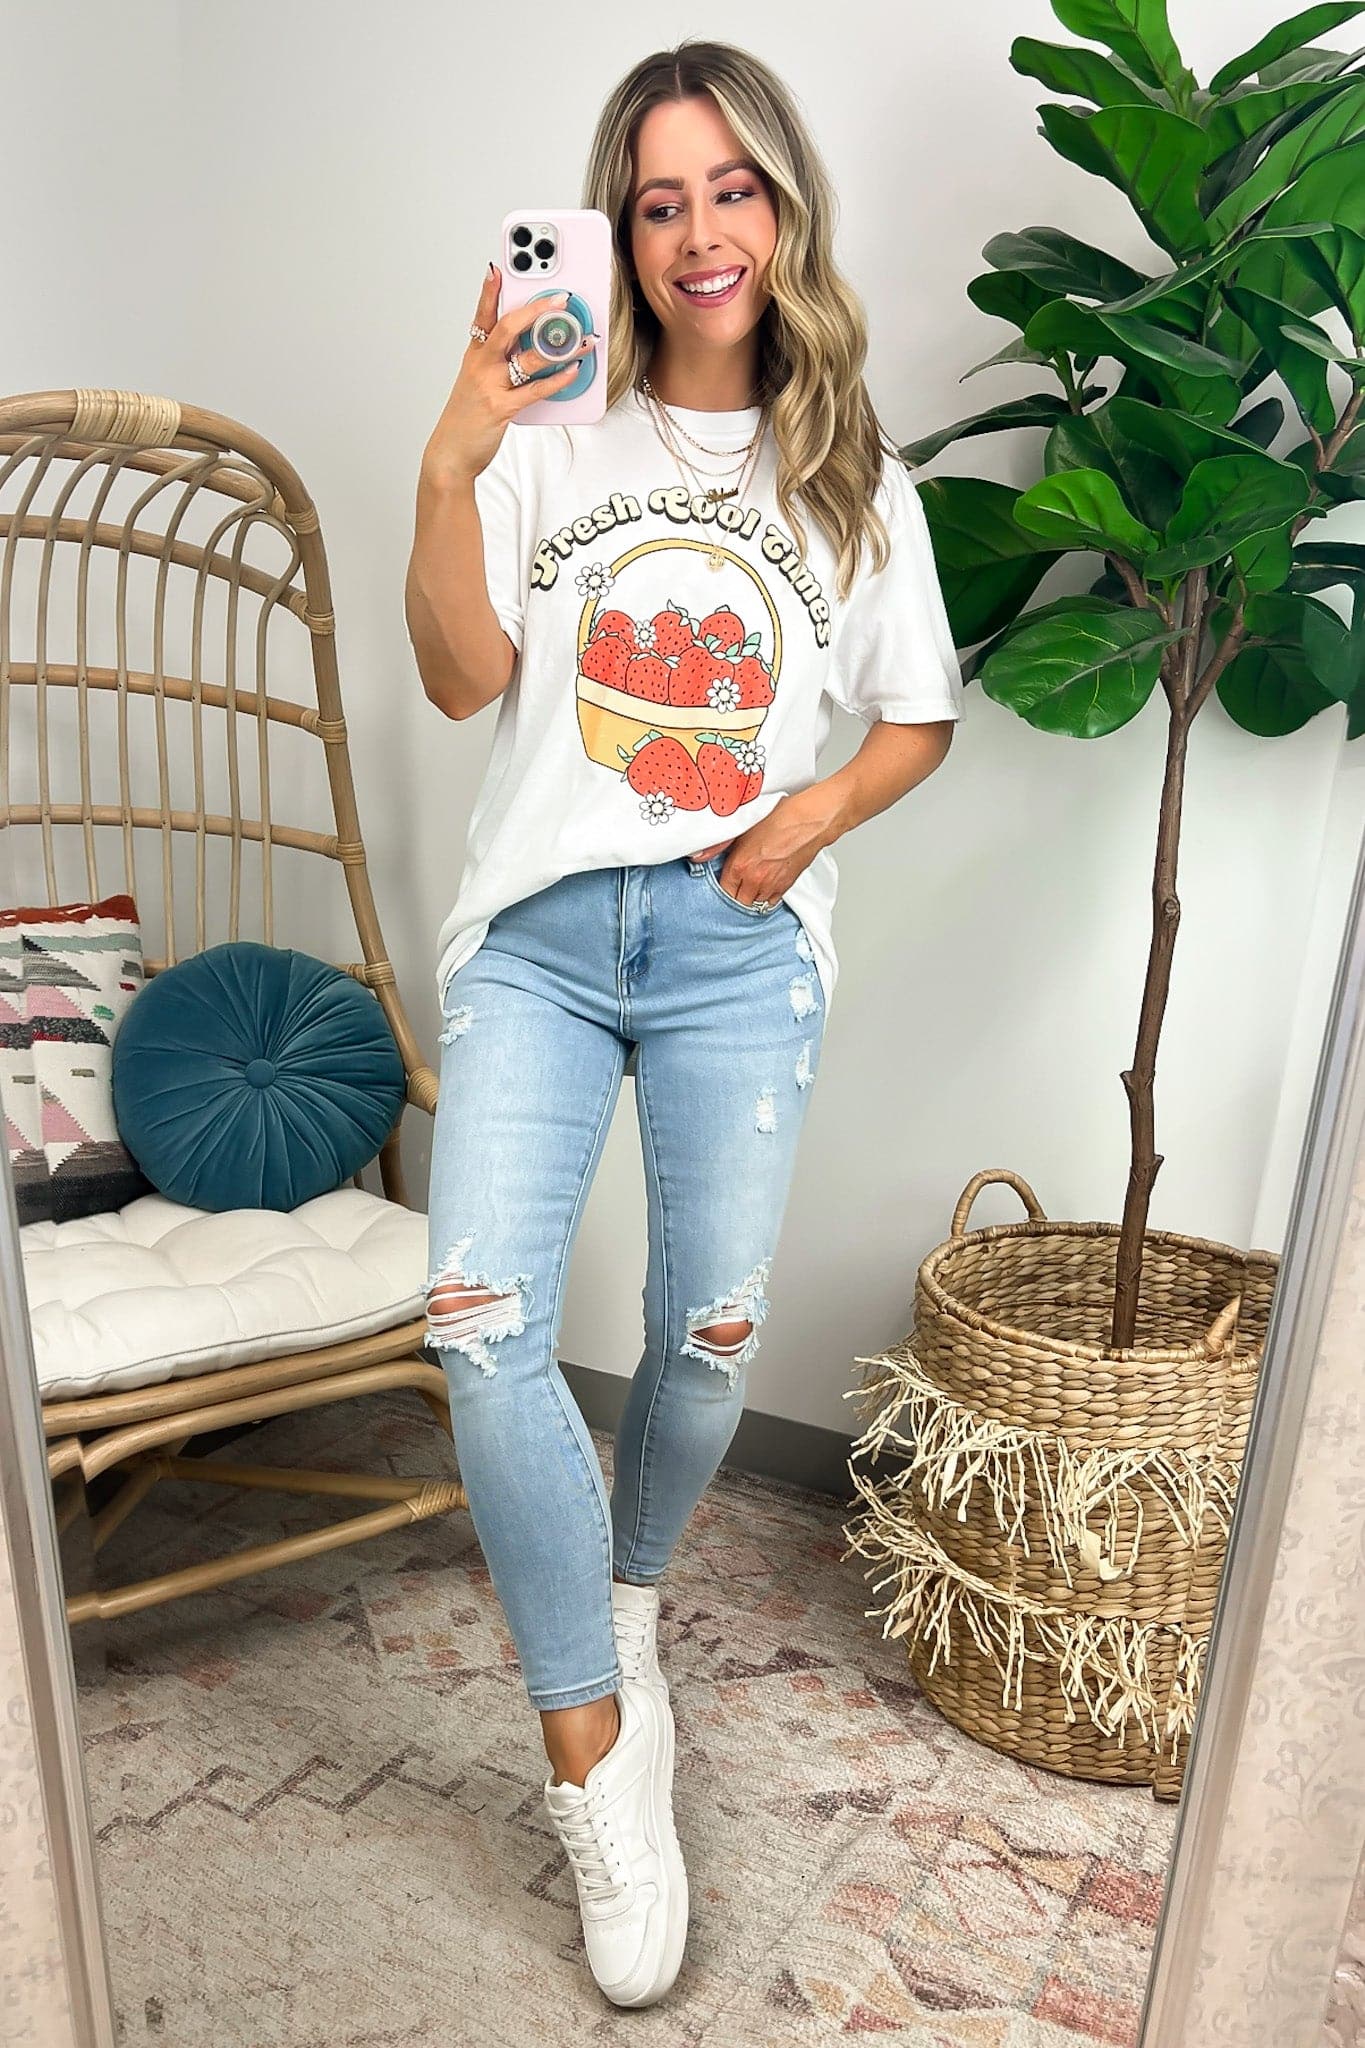  Fresh Cool Times Strawberry Vintage Graphic Tee - Madison and Mallory